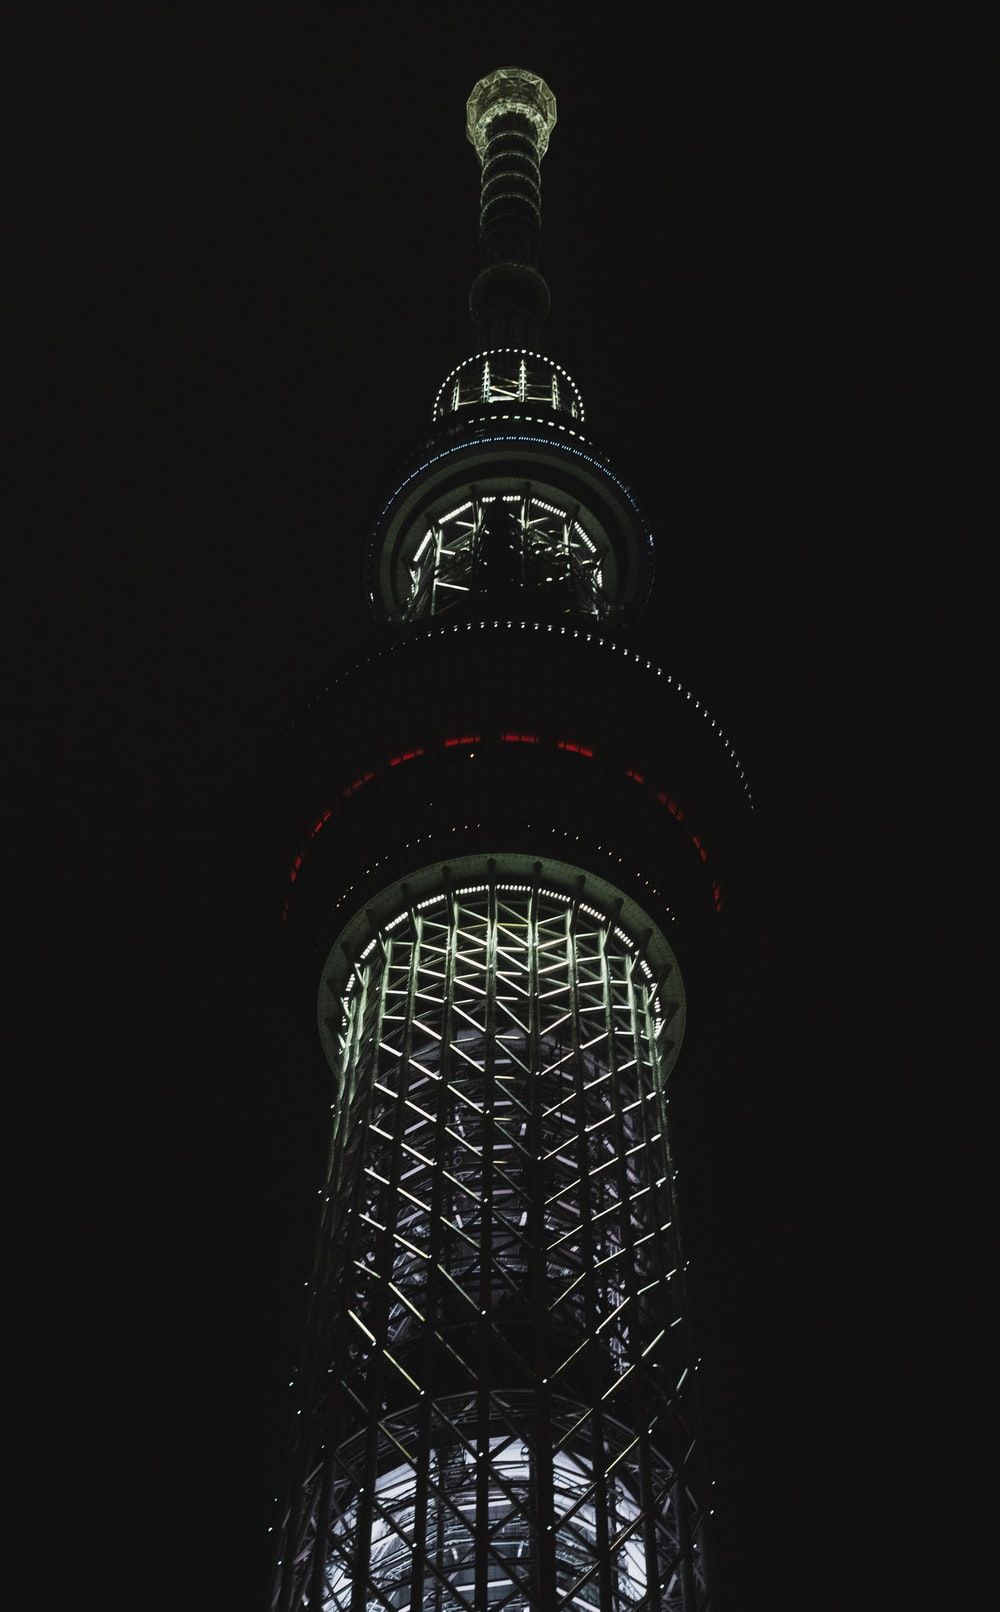 Tokyo Skytree Picture. Download Free Image